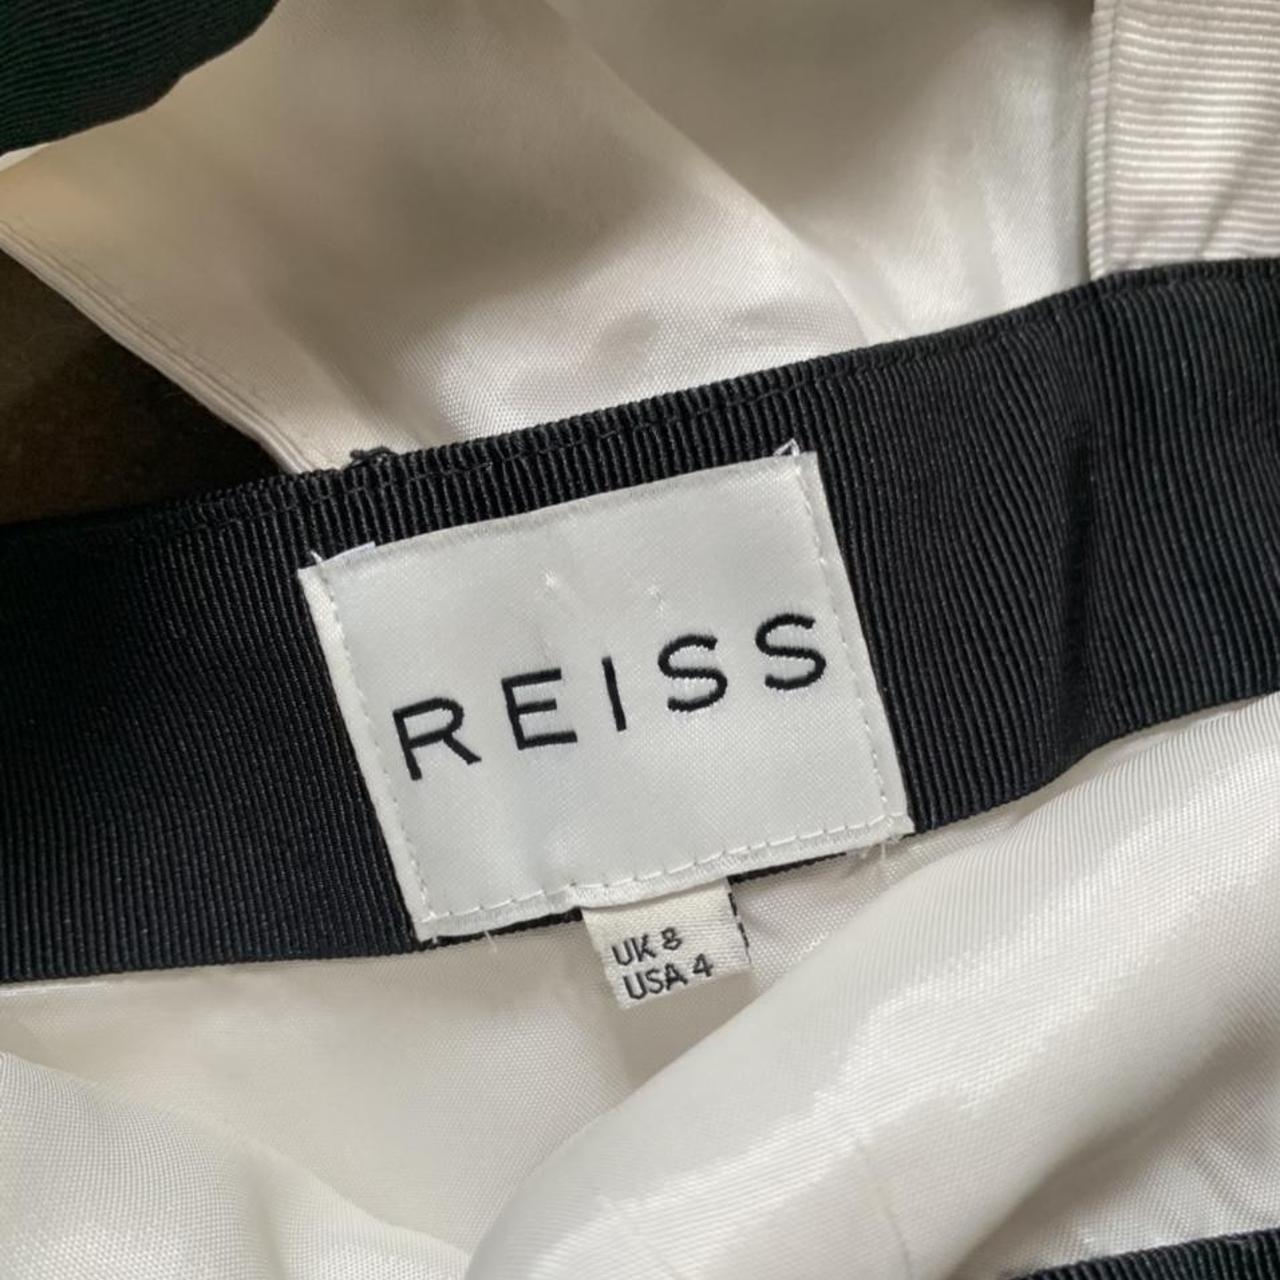 Reiss black and white party formal dress - Depop